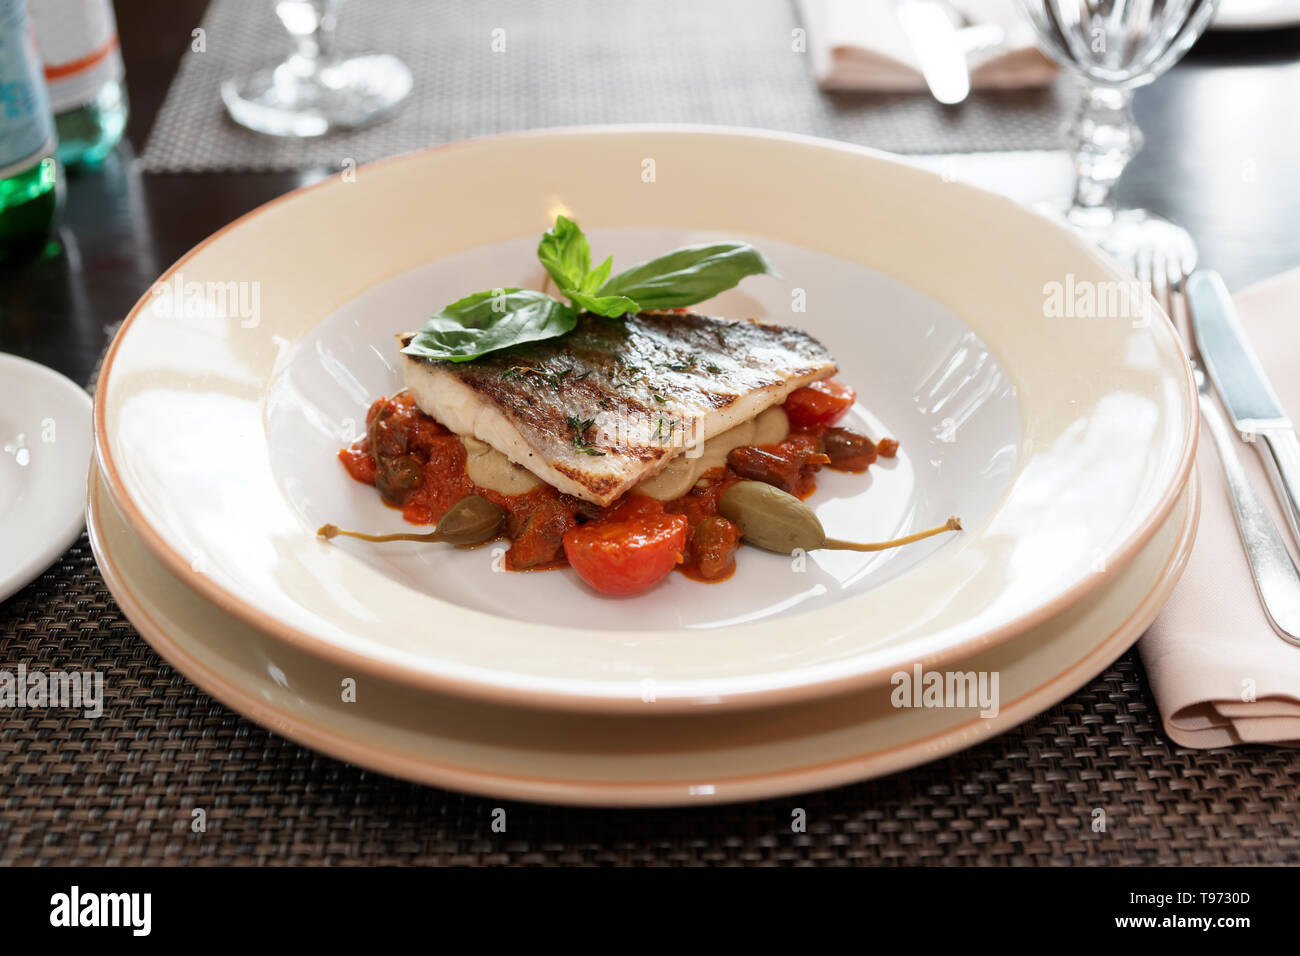 Sea bass fillet with tomato sauce and capers, place setting of a restaurant Stock Photo